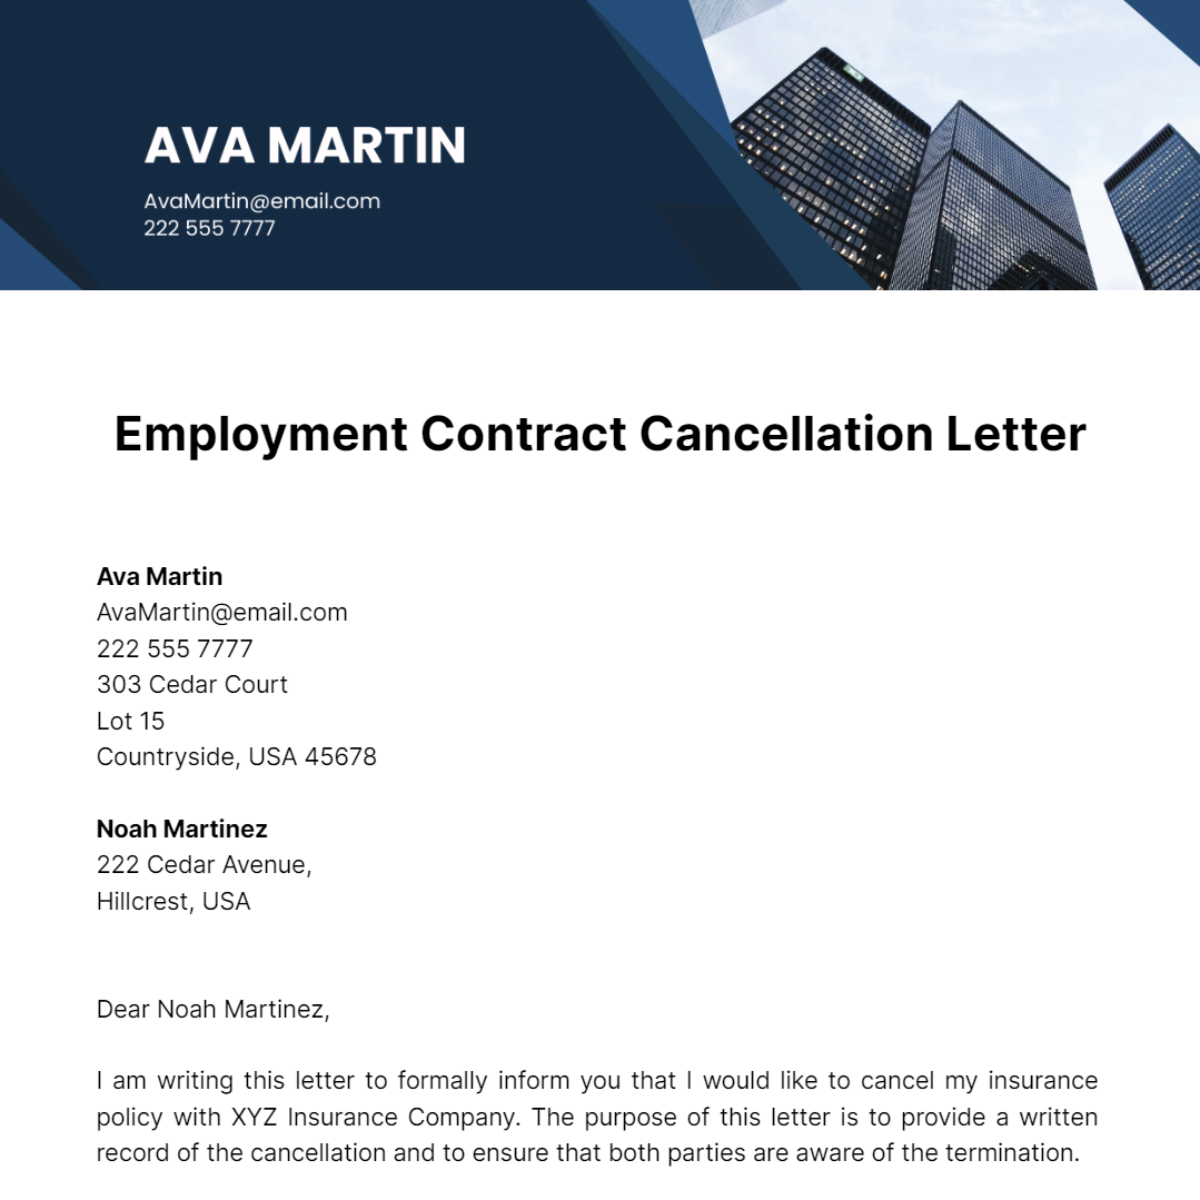 Employment Contract Cancellation Letter Template